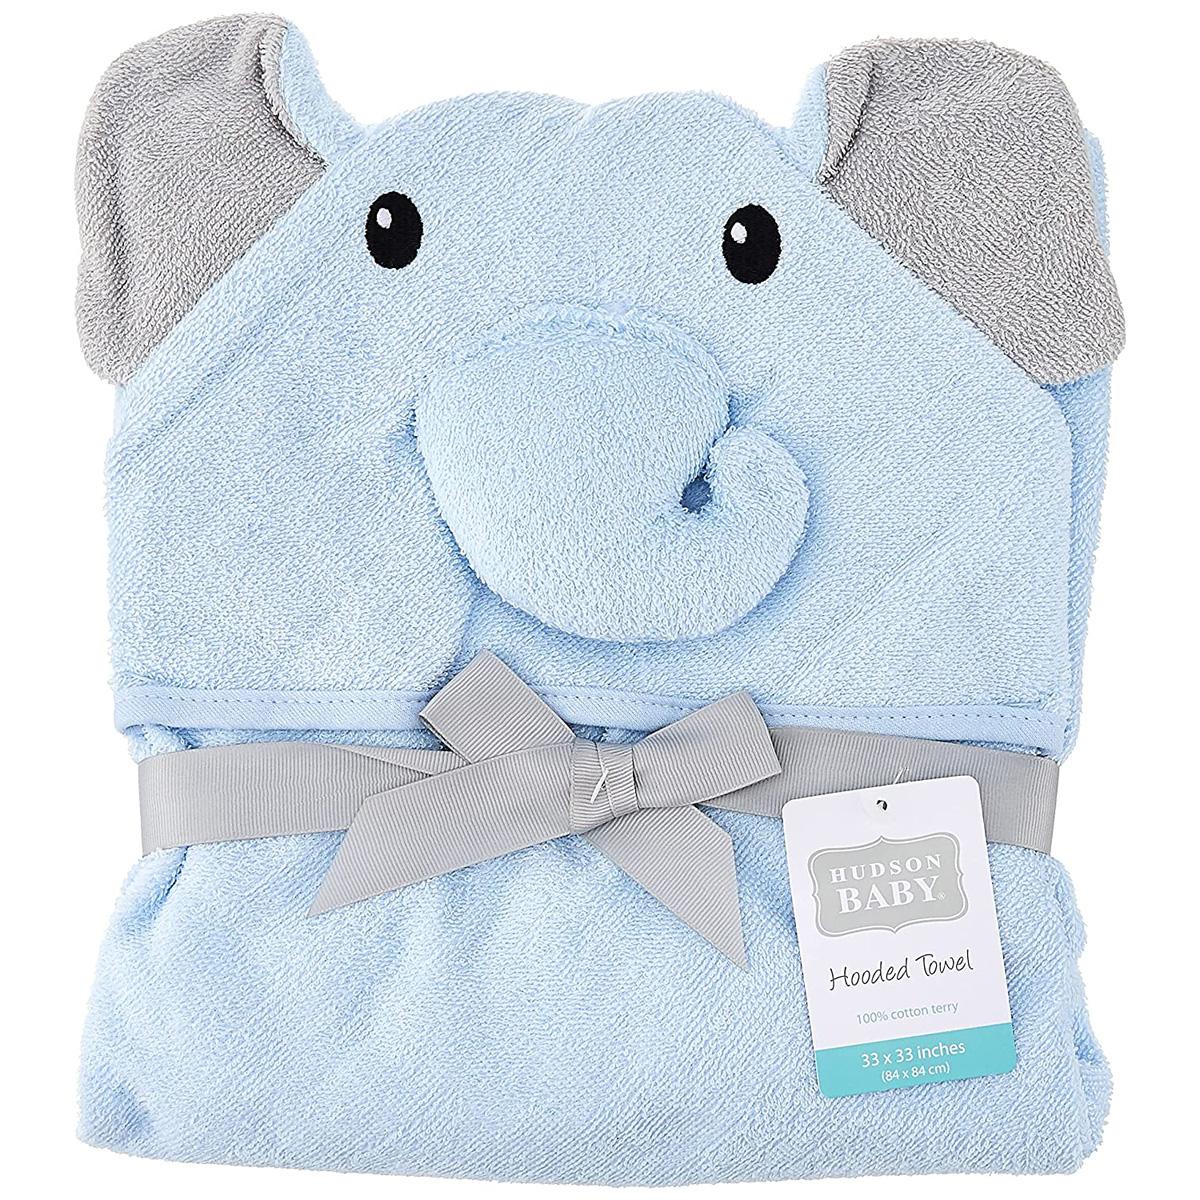 Hudson Baby Unisex Baby Elephant Face Hooded Towel for $7.70